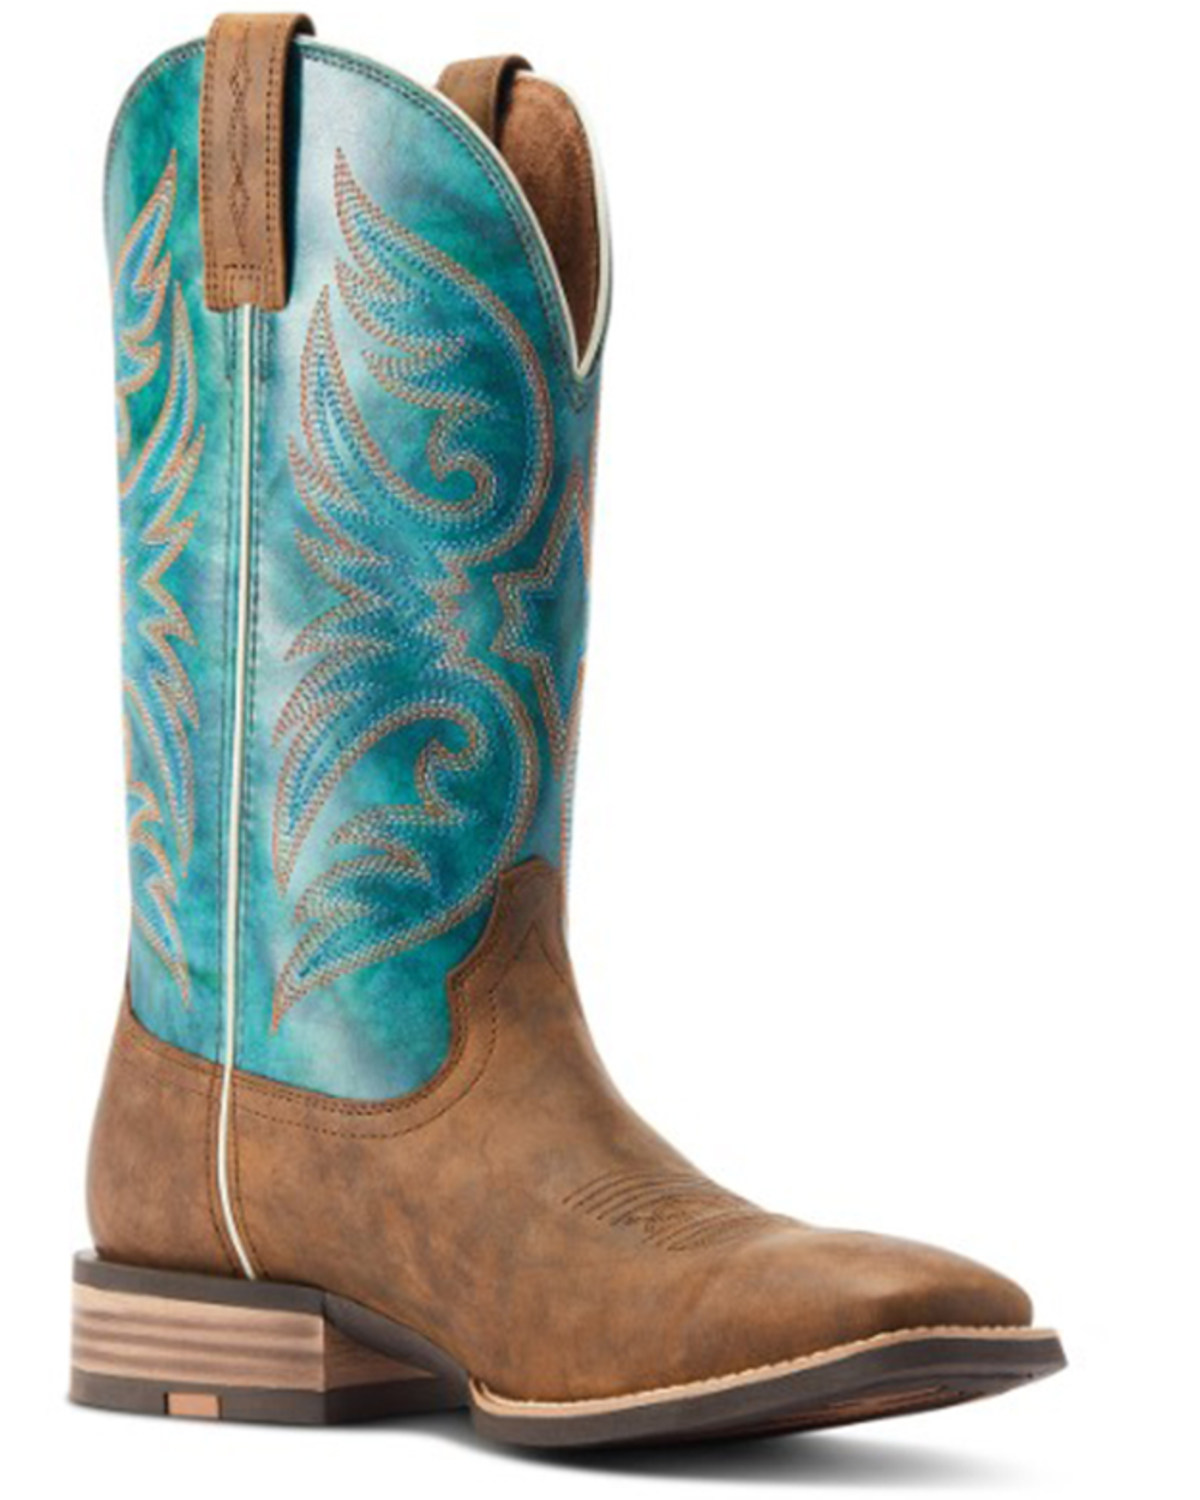 Ariat Men's Ricochet Western Performance  Boots - Broad Square Toe